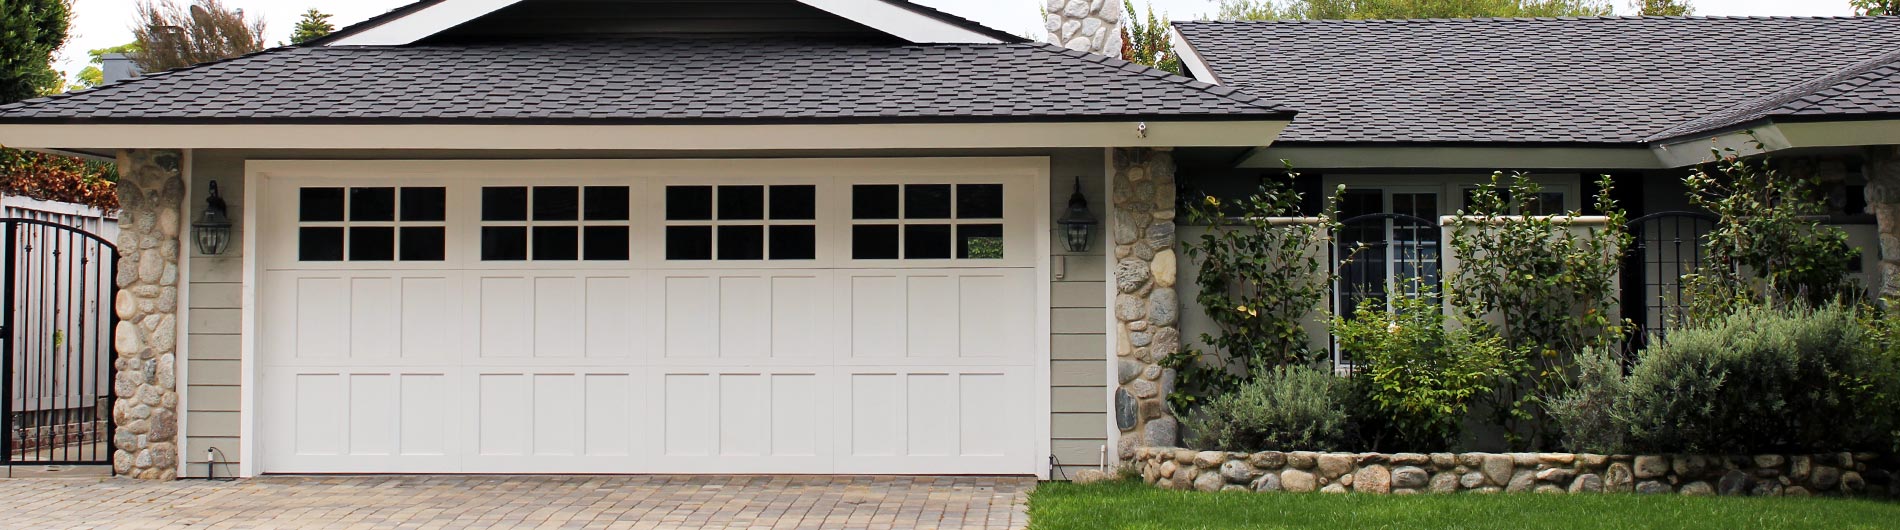 white colonial style garage doors